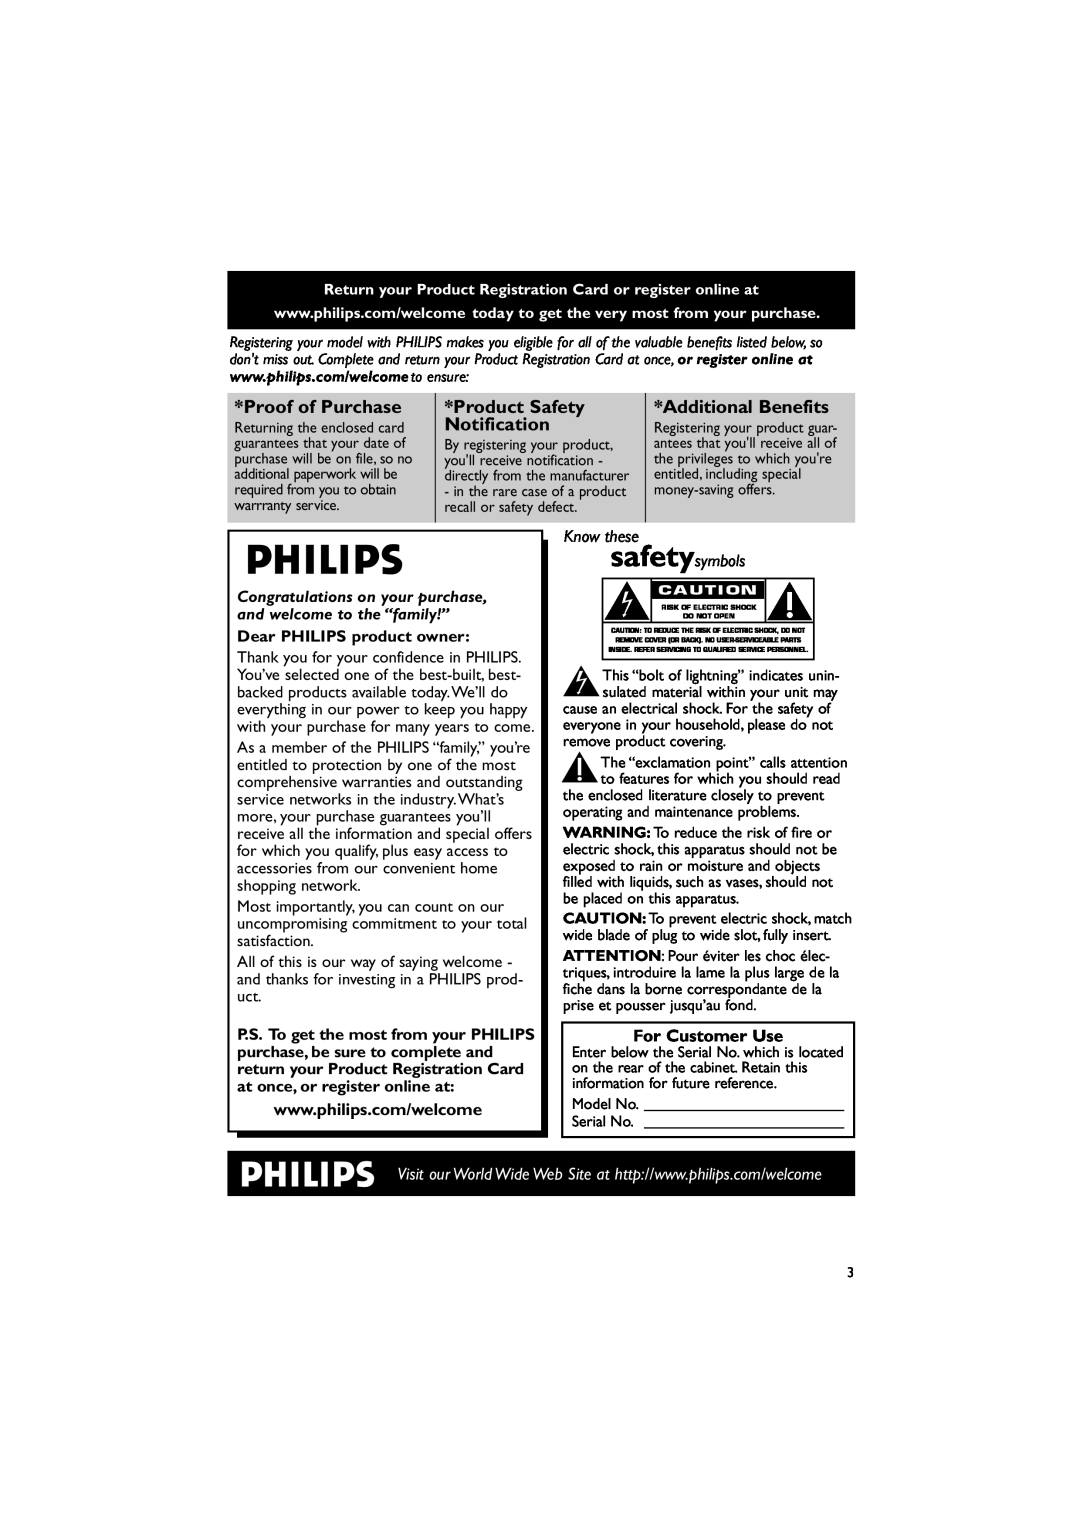 Philips DC912 quick start For Customer Use, Proof of Purchase, Product Safety, Additional Benefits, Notification 